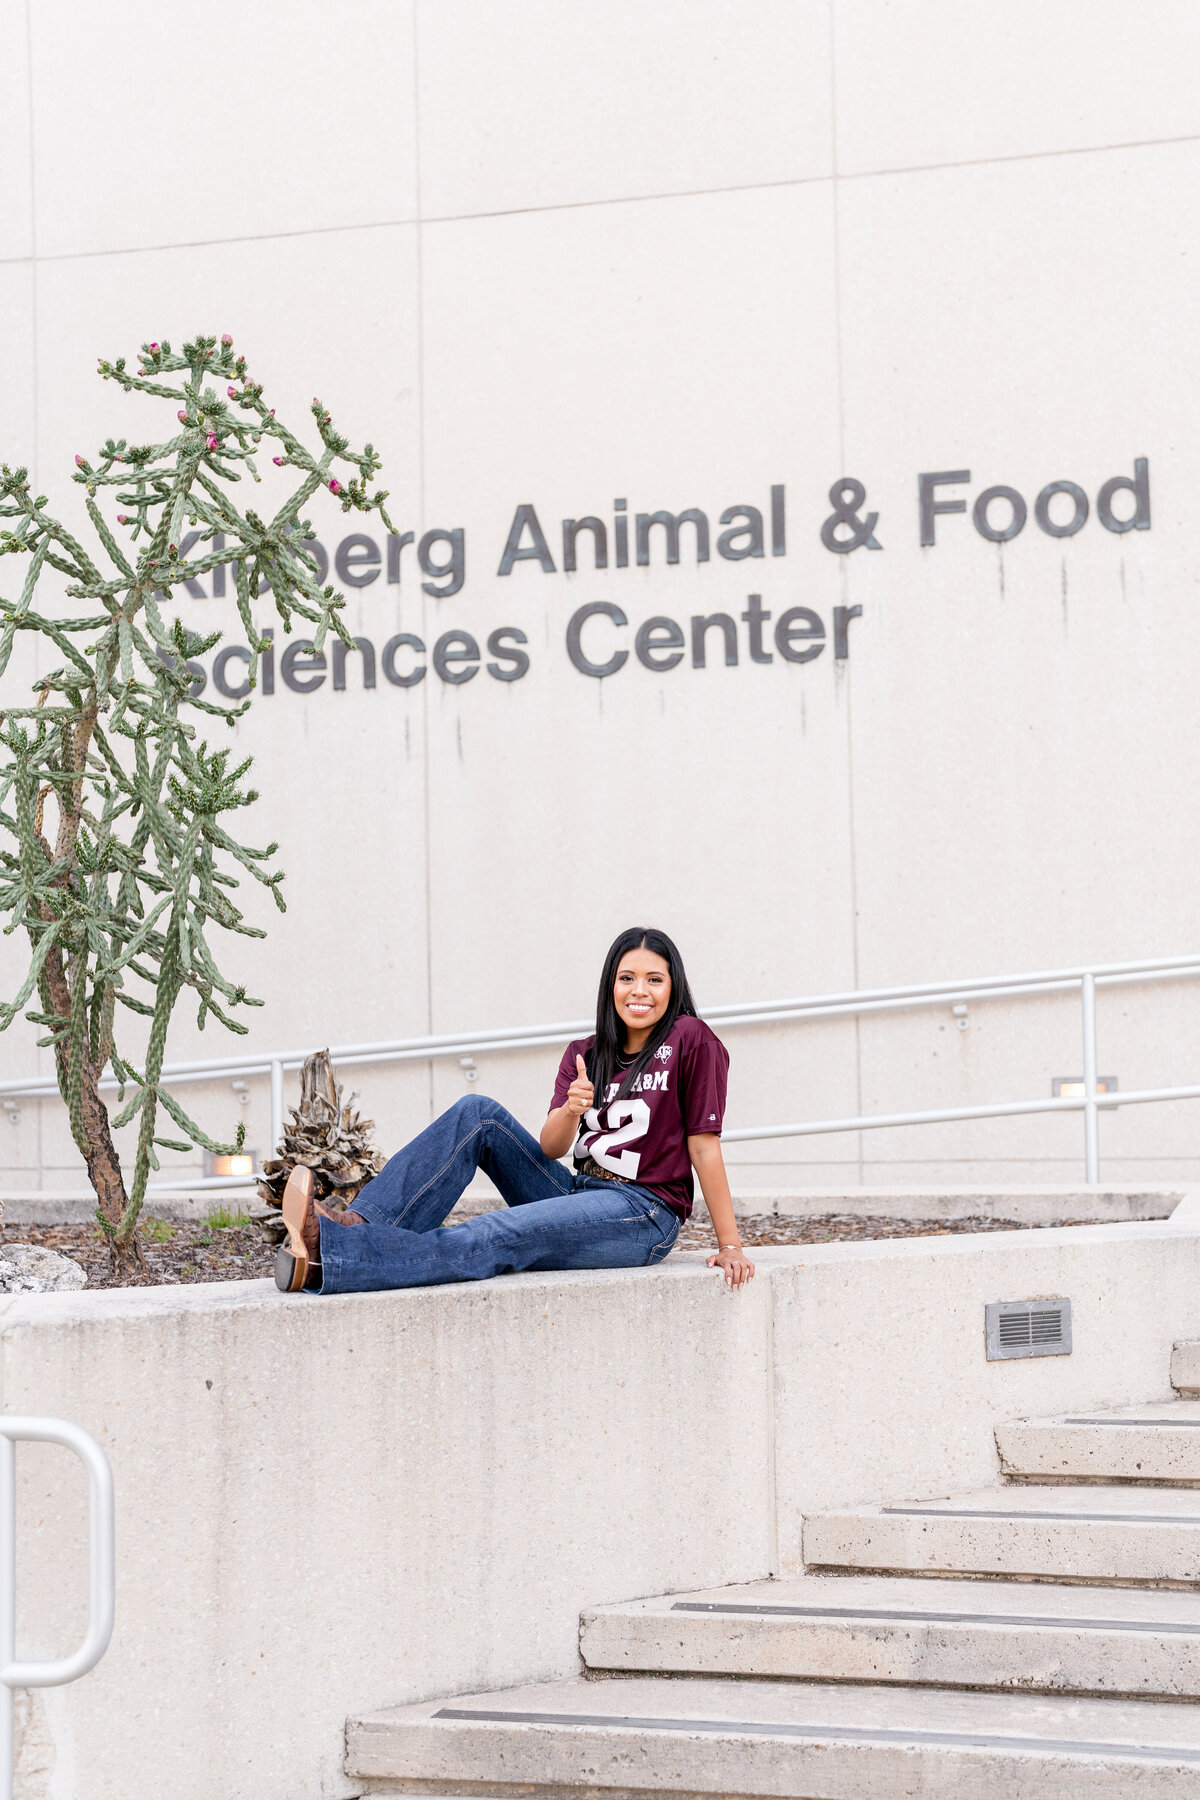 Texas A&M senior girl sitting on ledge at Kleberg wearing jeans and Aggie maroon jersey and giving a thumbs up